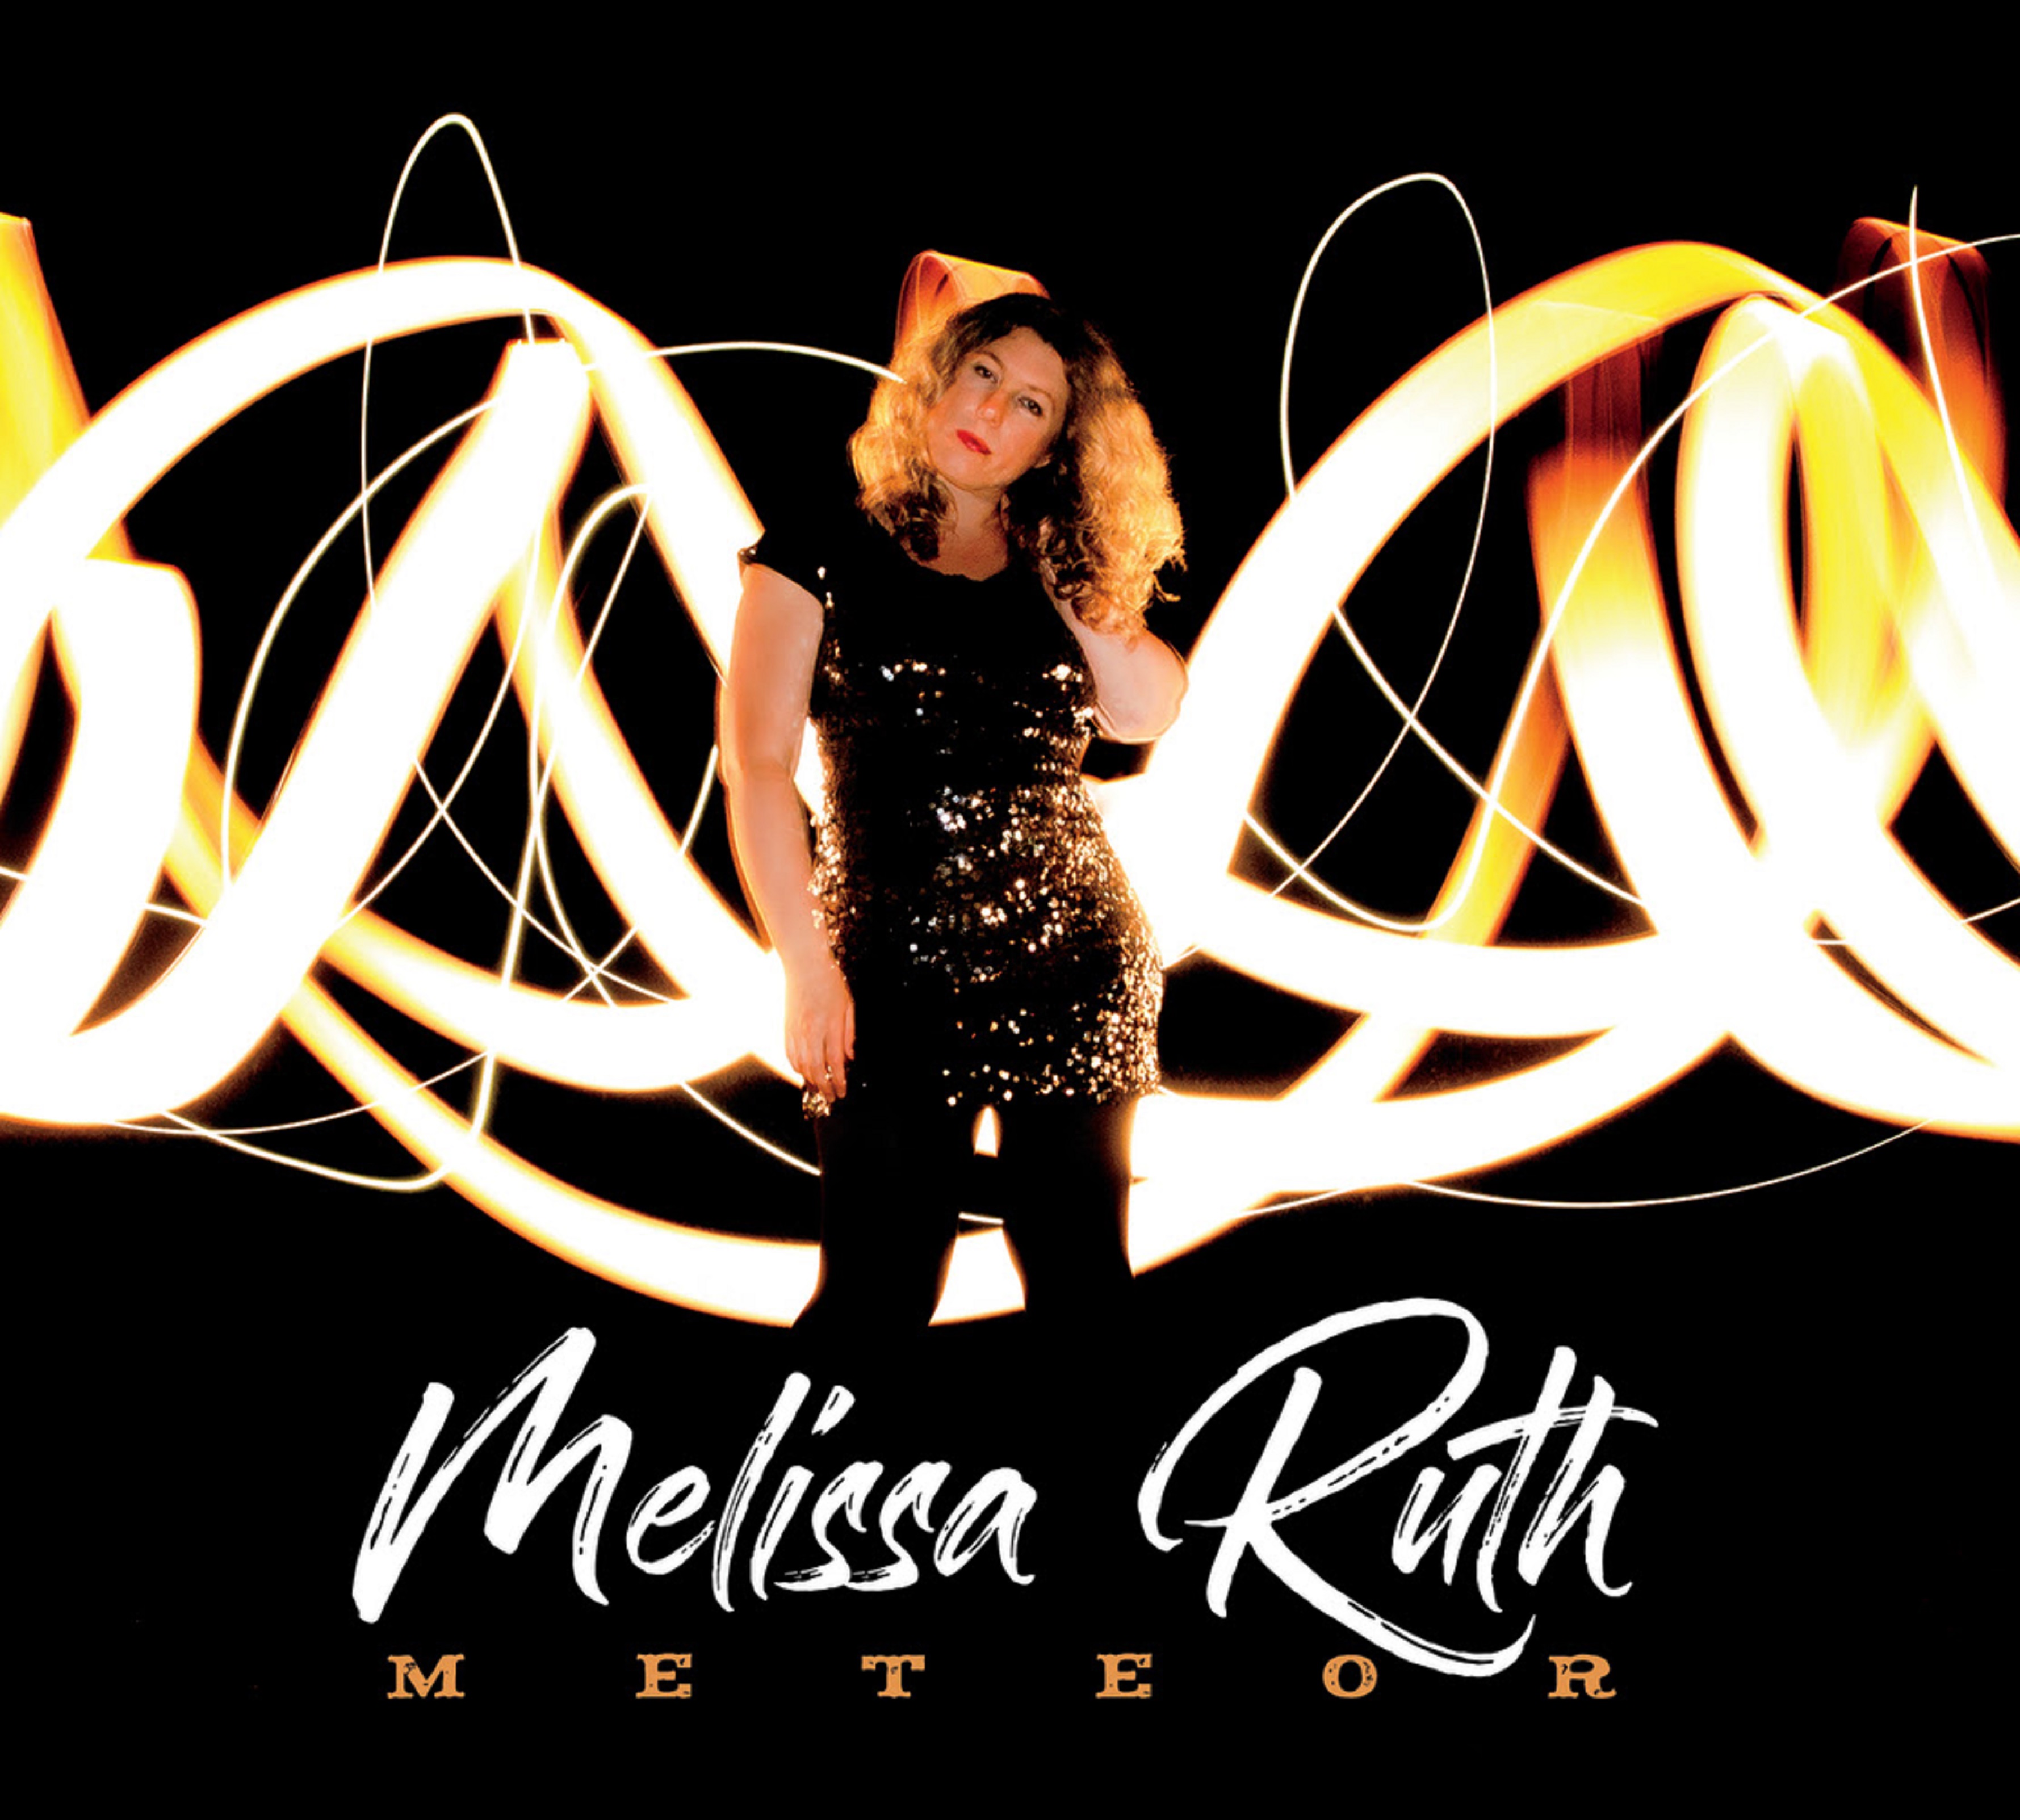 Melissa Ruth Released 'Meteor' on March 1